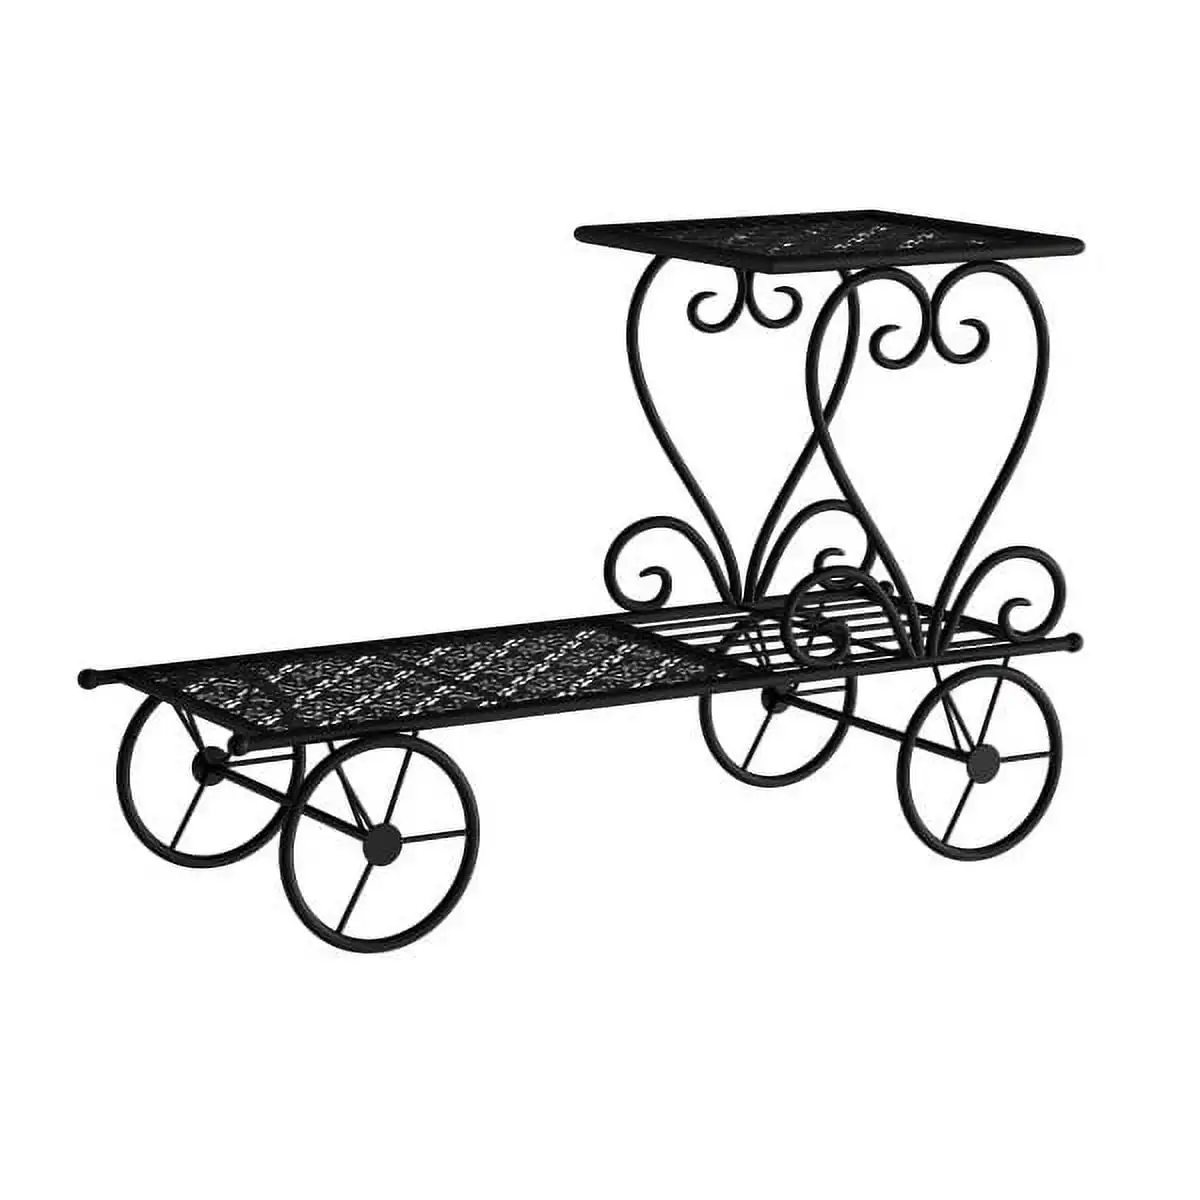 

Plant Stand 2-Tiered Indoor or Outdoor Decorative Vintage Look Wrought Iron Garden Cart for Patio, Deck, Home or Lawn